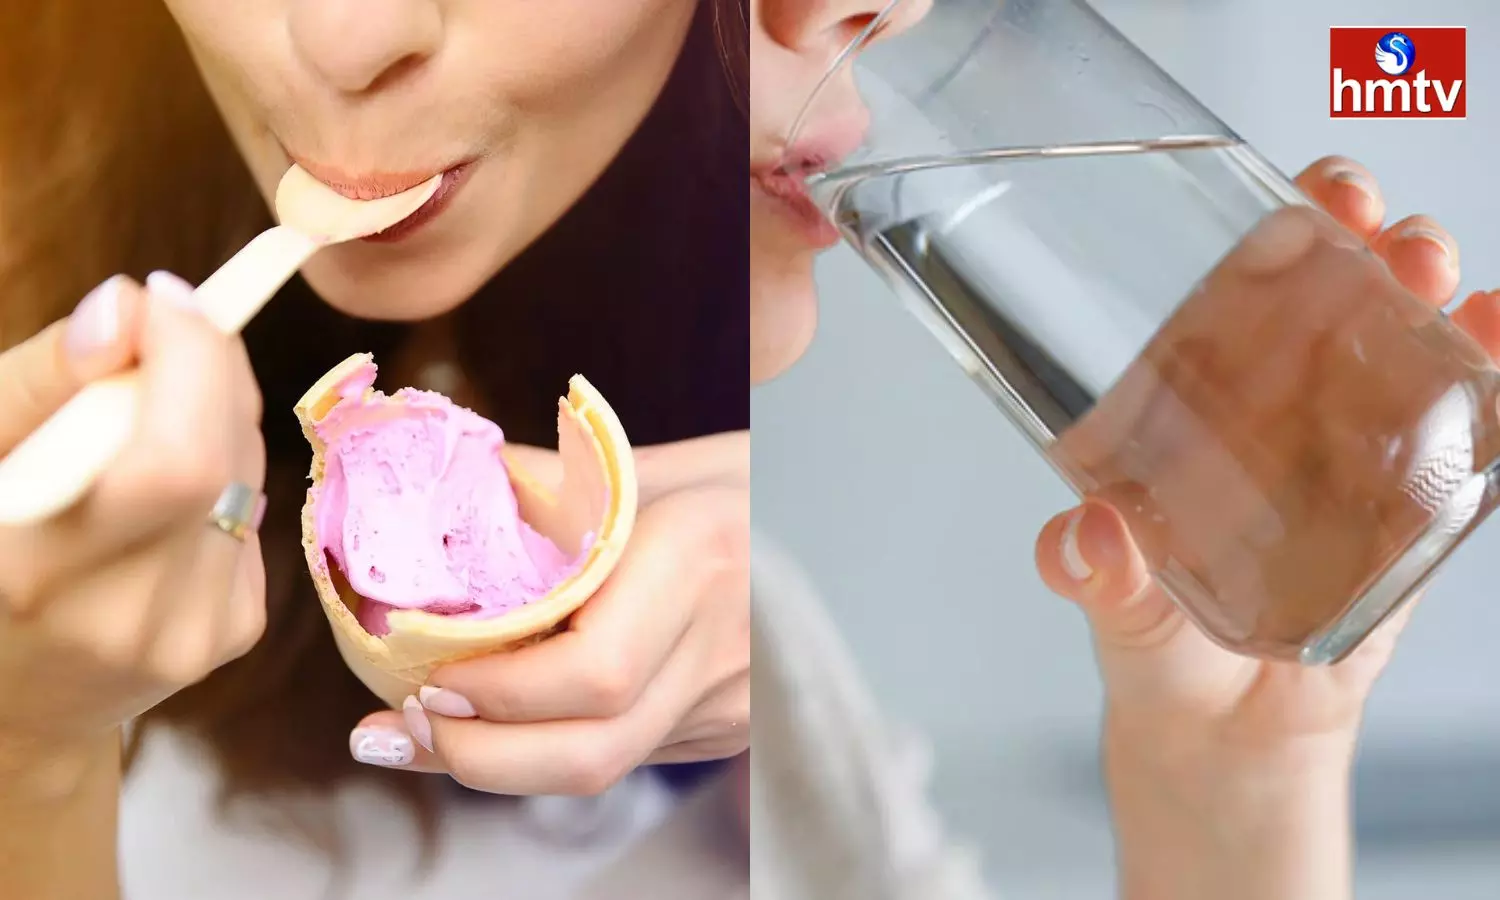 Know How Long to Drink Water after Eating Ice Cream